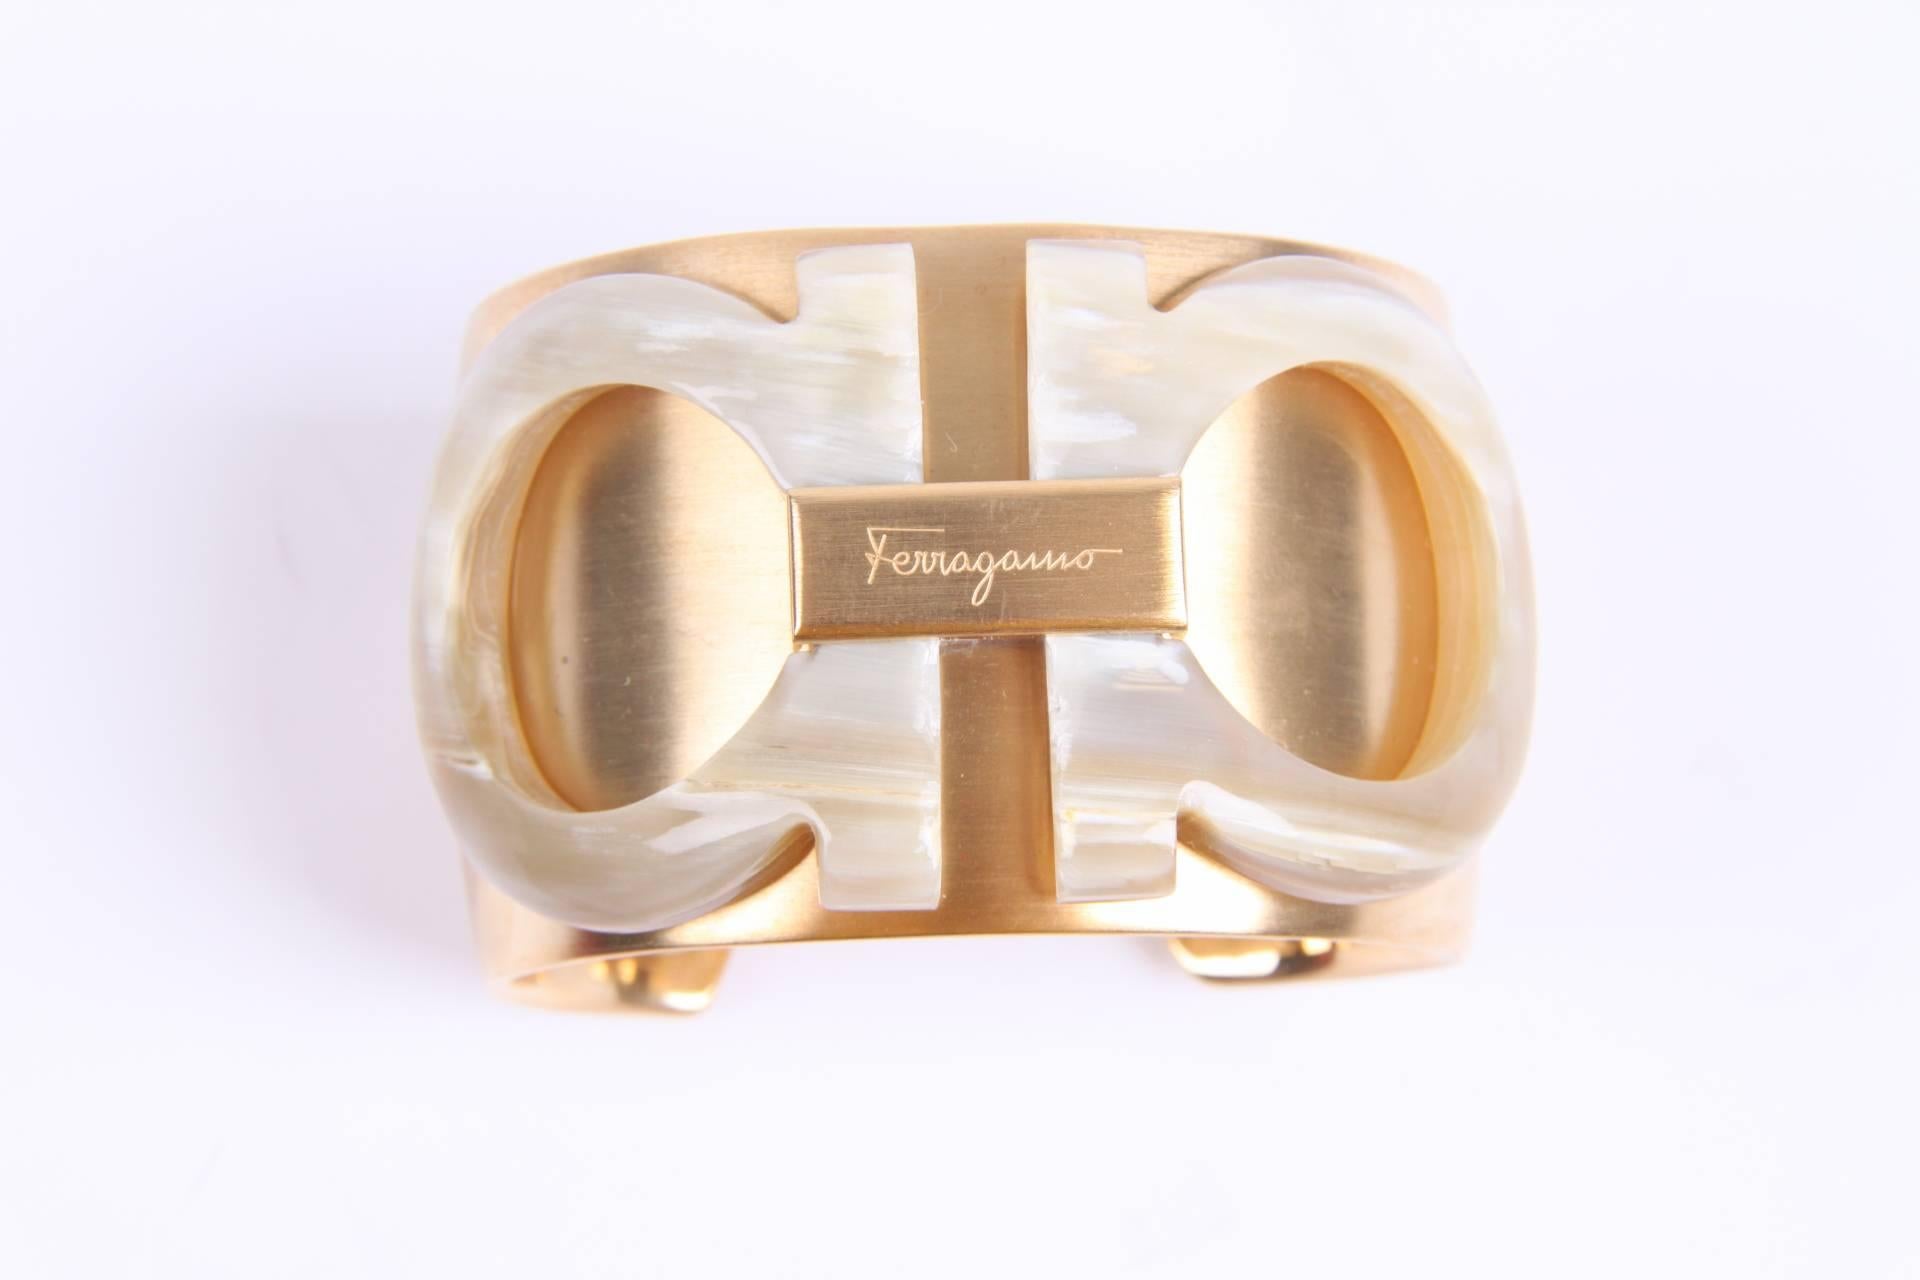 Super cool cuff bracelet by Salvatore Ferragamo, the bone logo that is place on top is called Gancini.

Crafted in heavy metal with a matte gold-tone finish. And,... we have two of these beauties! Fantastic to wear them both on the same time, one on